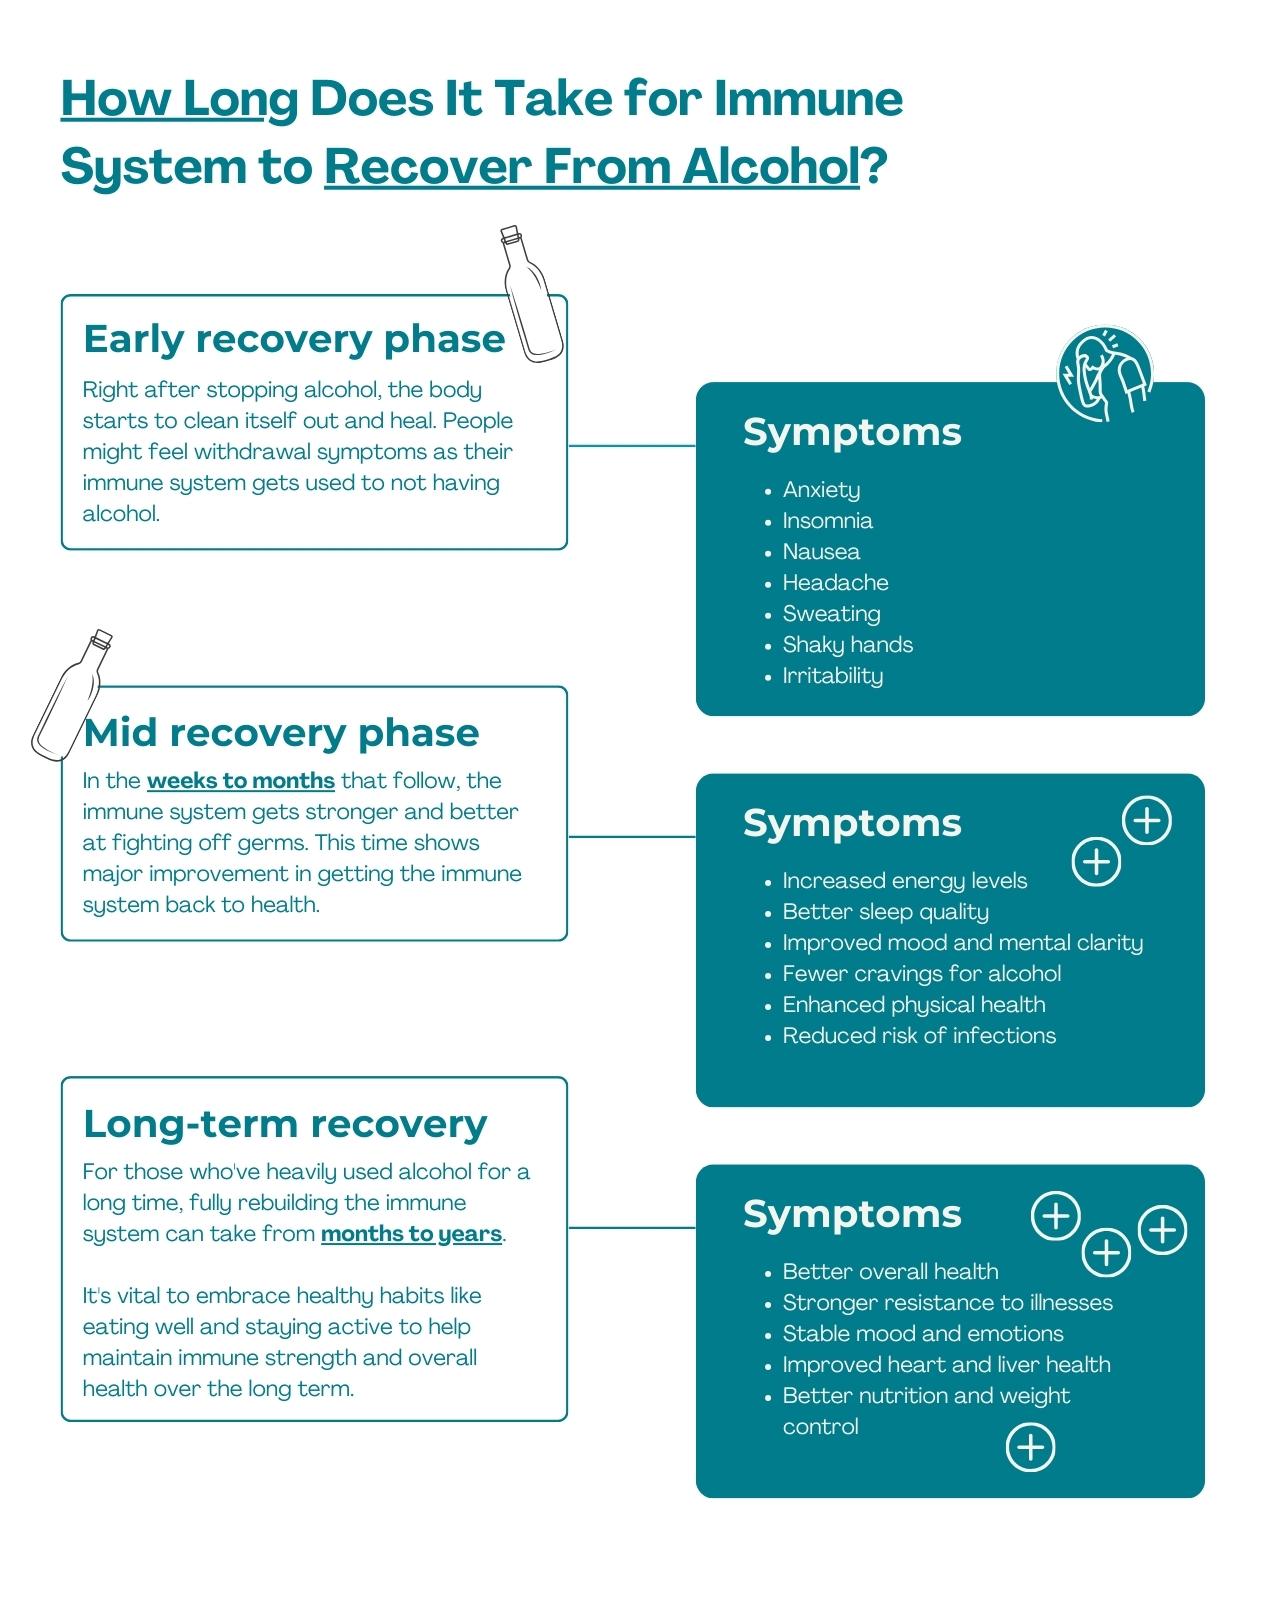 Illustration of three recovery stages from alcohol that direct immune health